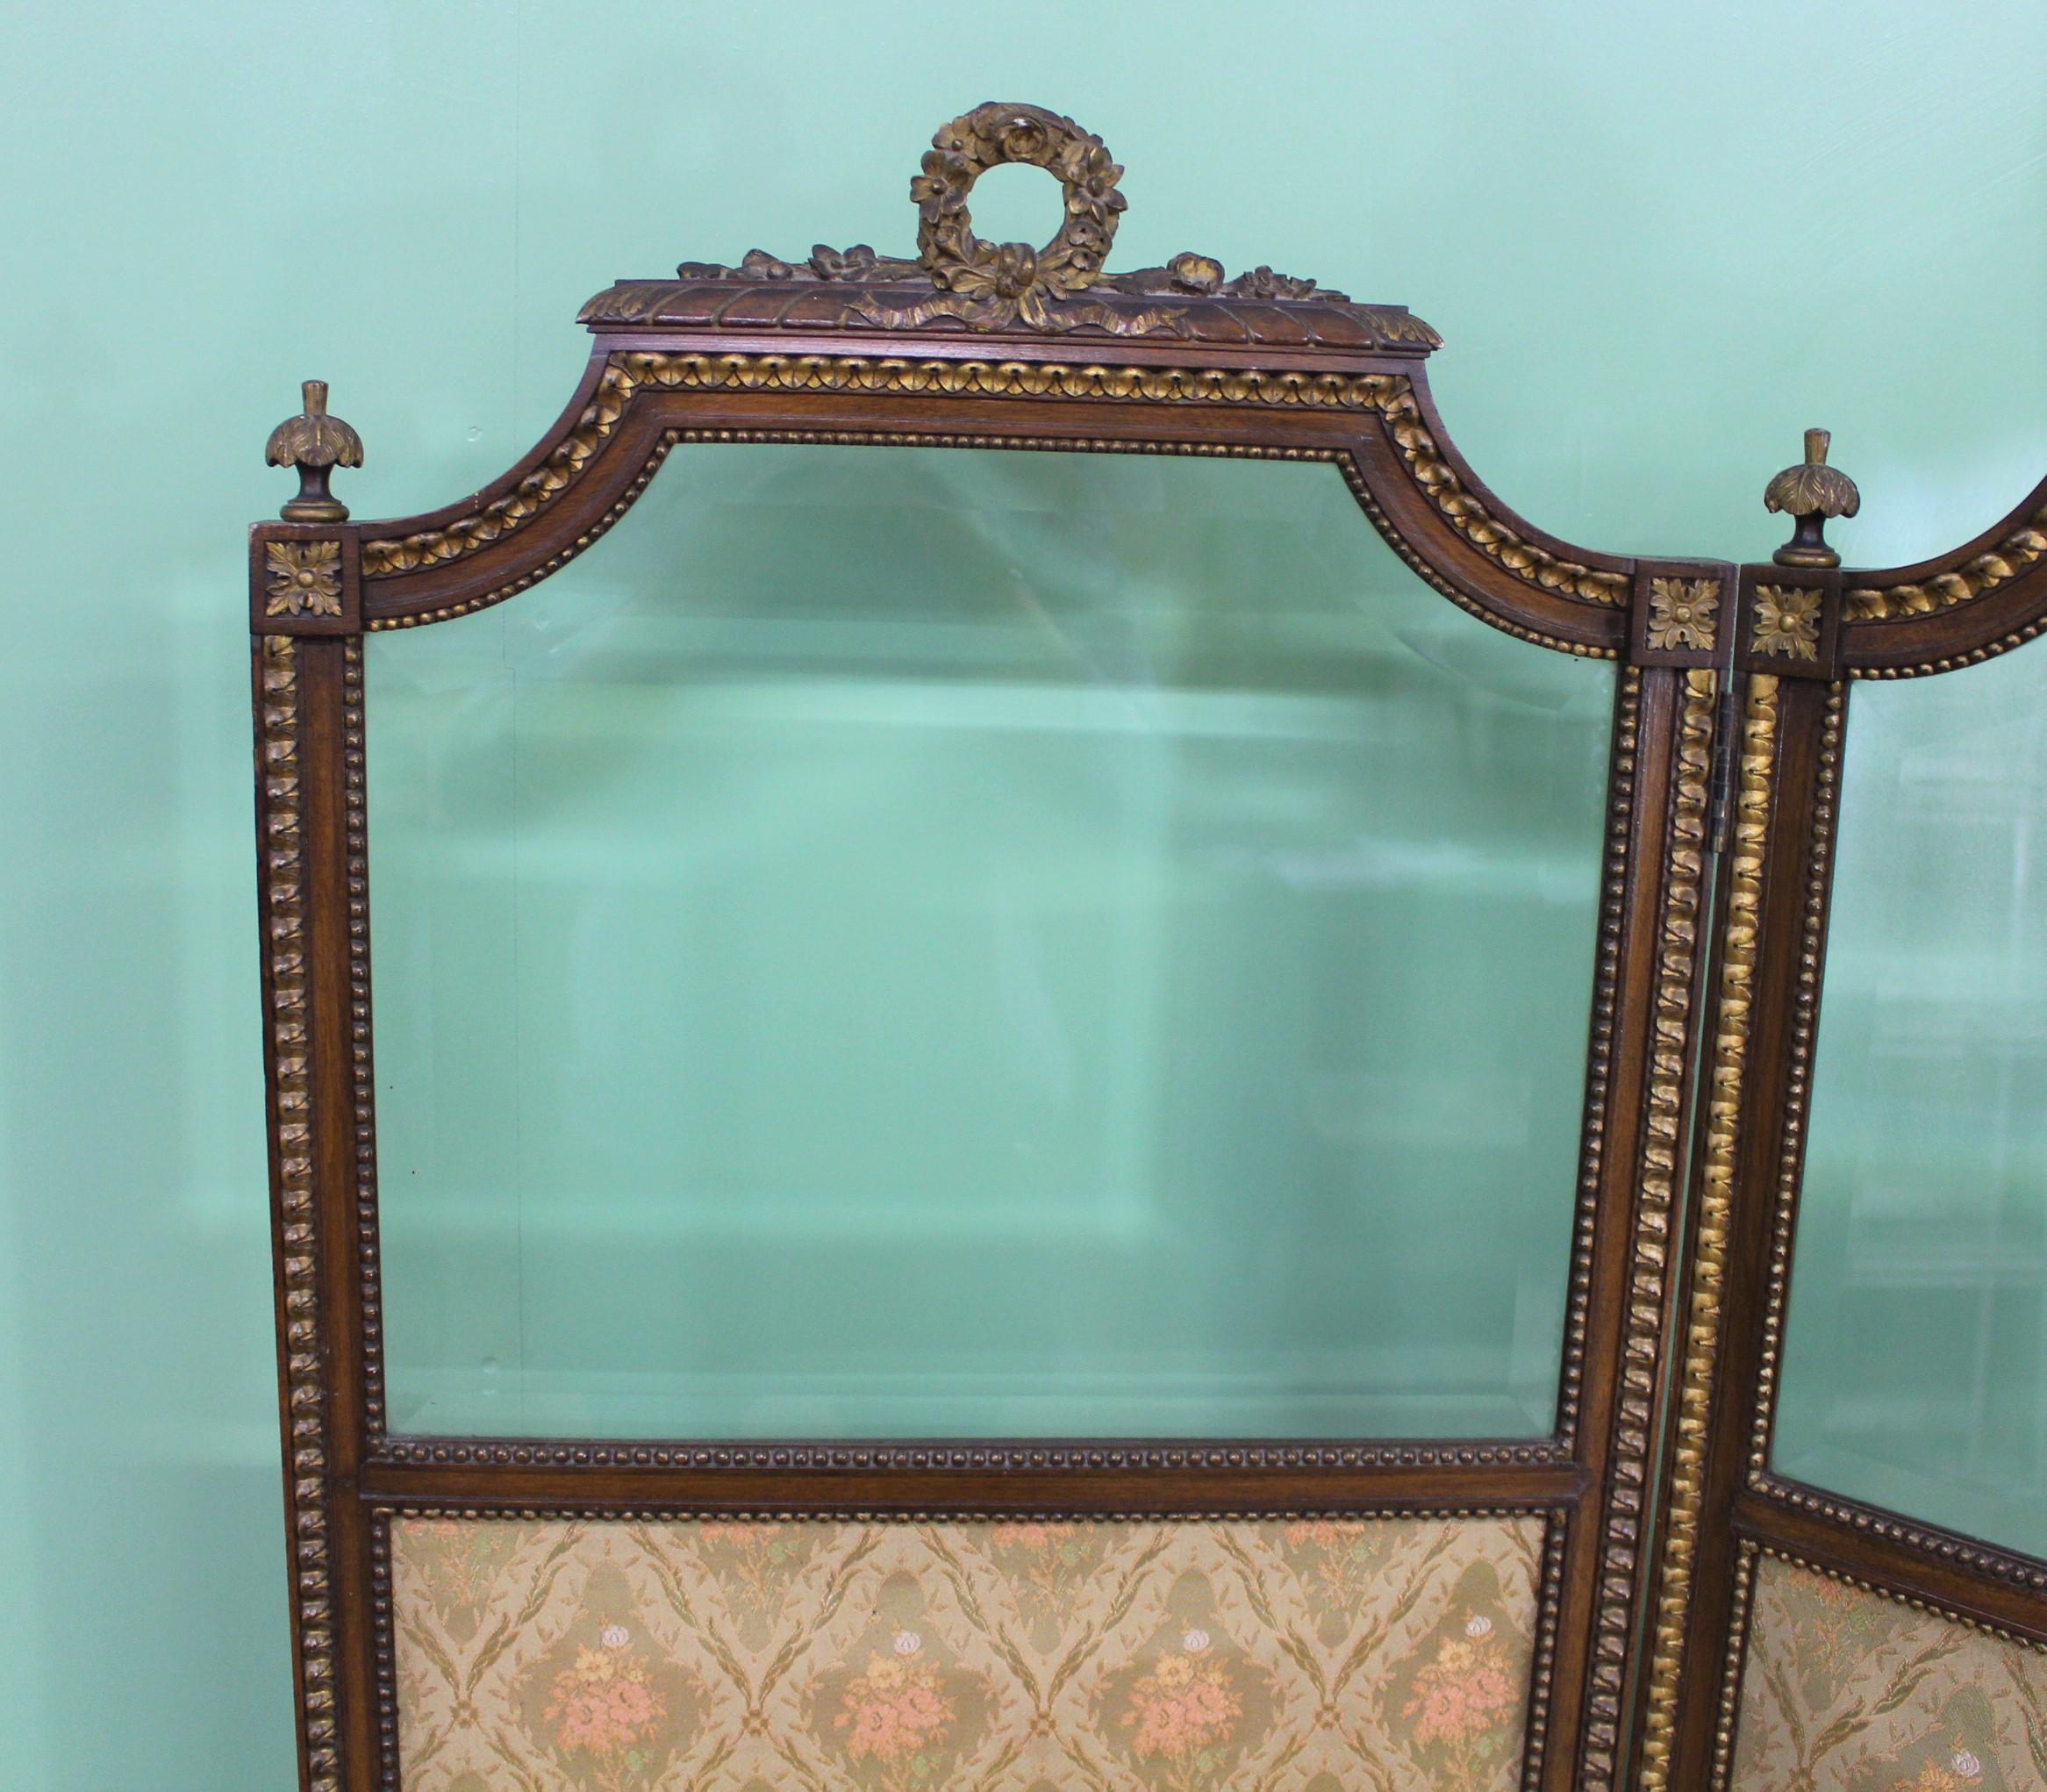 A charming and decorative French 3 fold dressing screen. Well constructed with a solid walnut frame embellished with parcel gilt decorations throughout in a neoclassical style. Fitted with its original beveled plate glass and lining material.